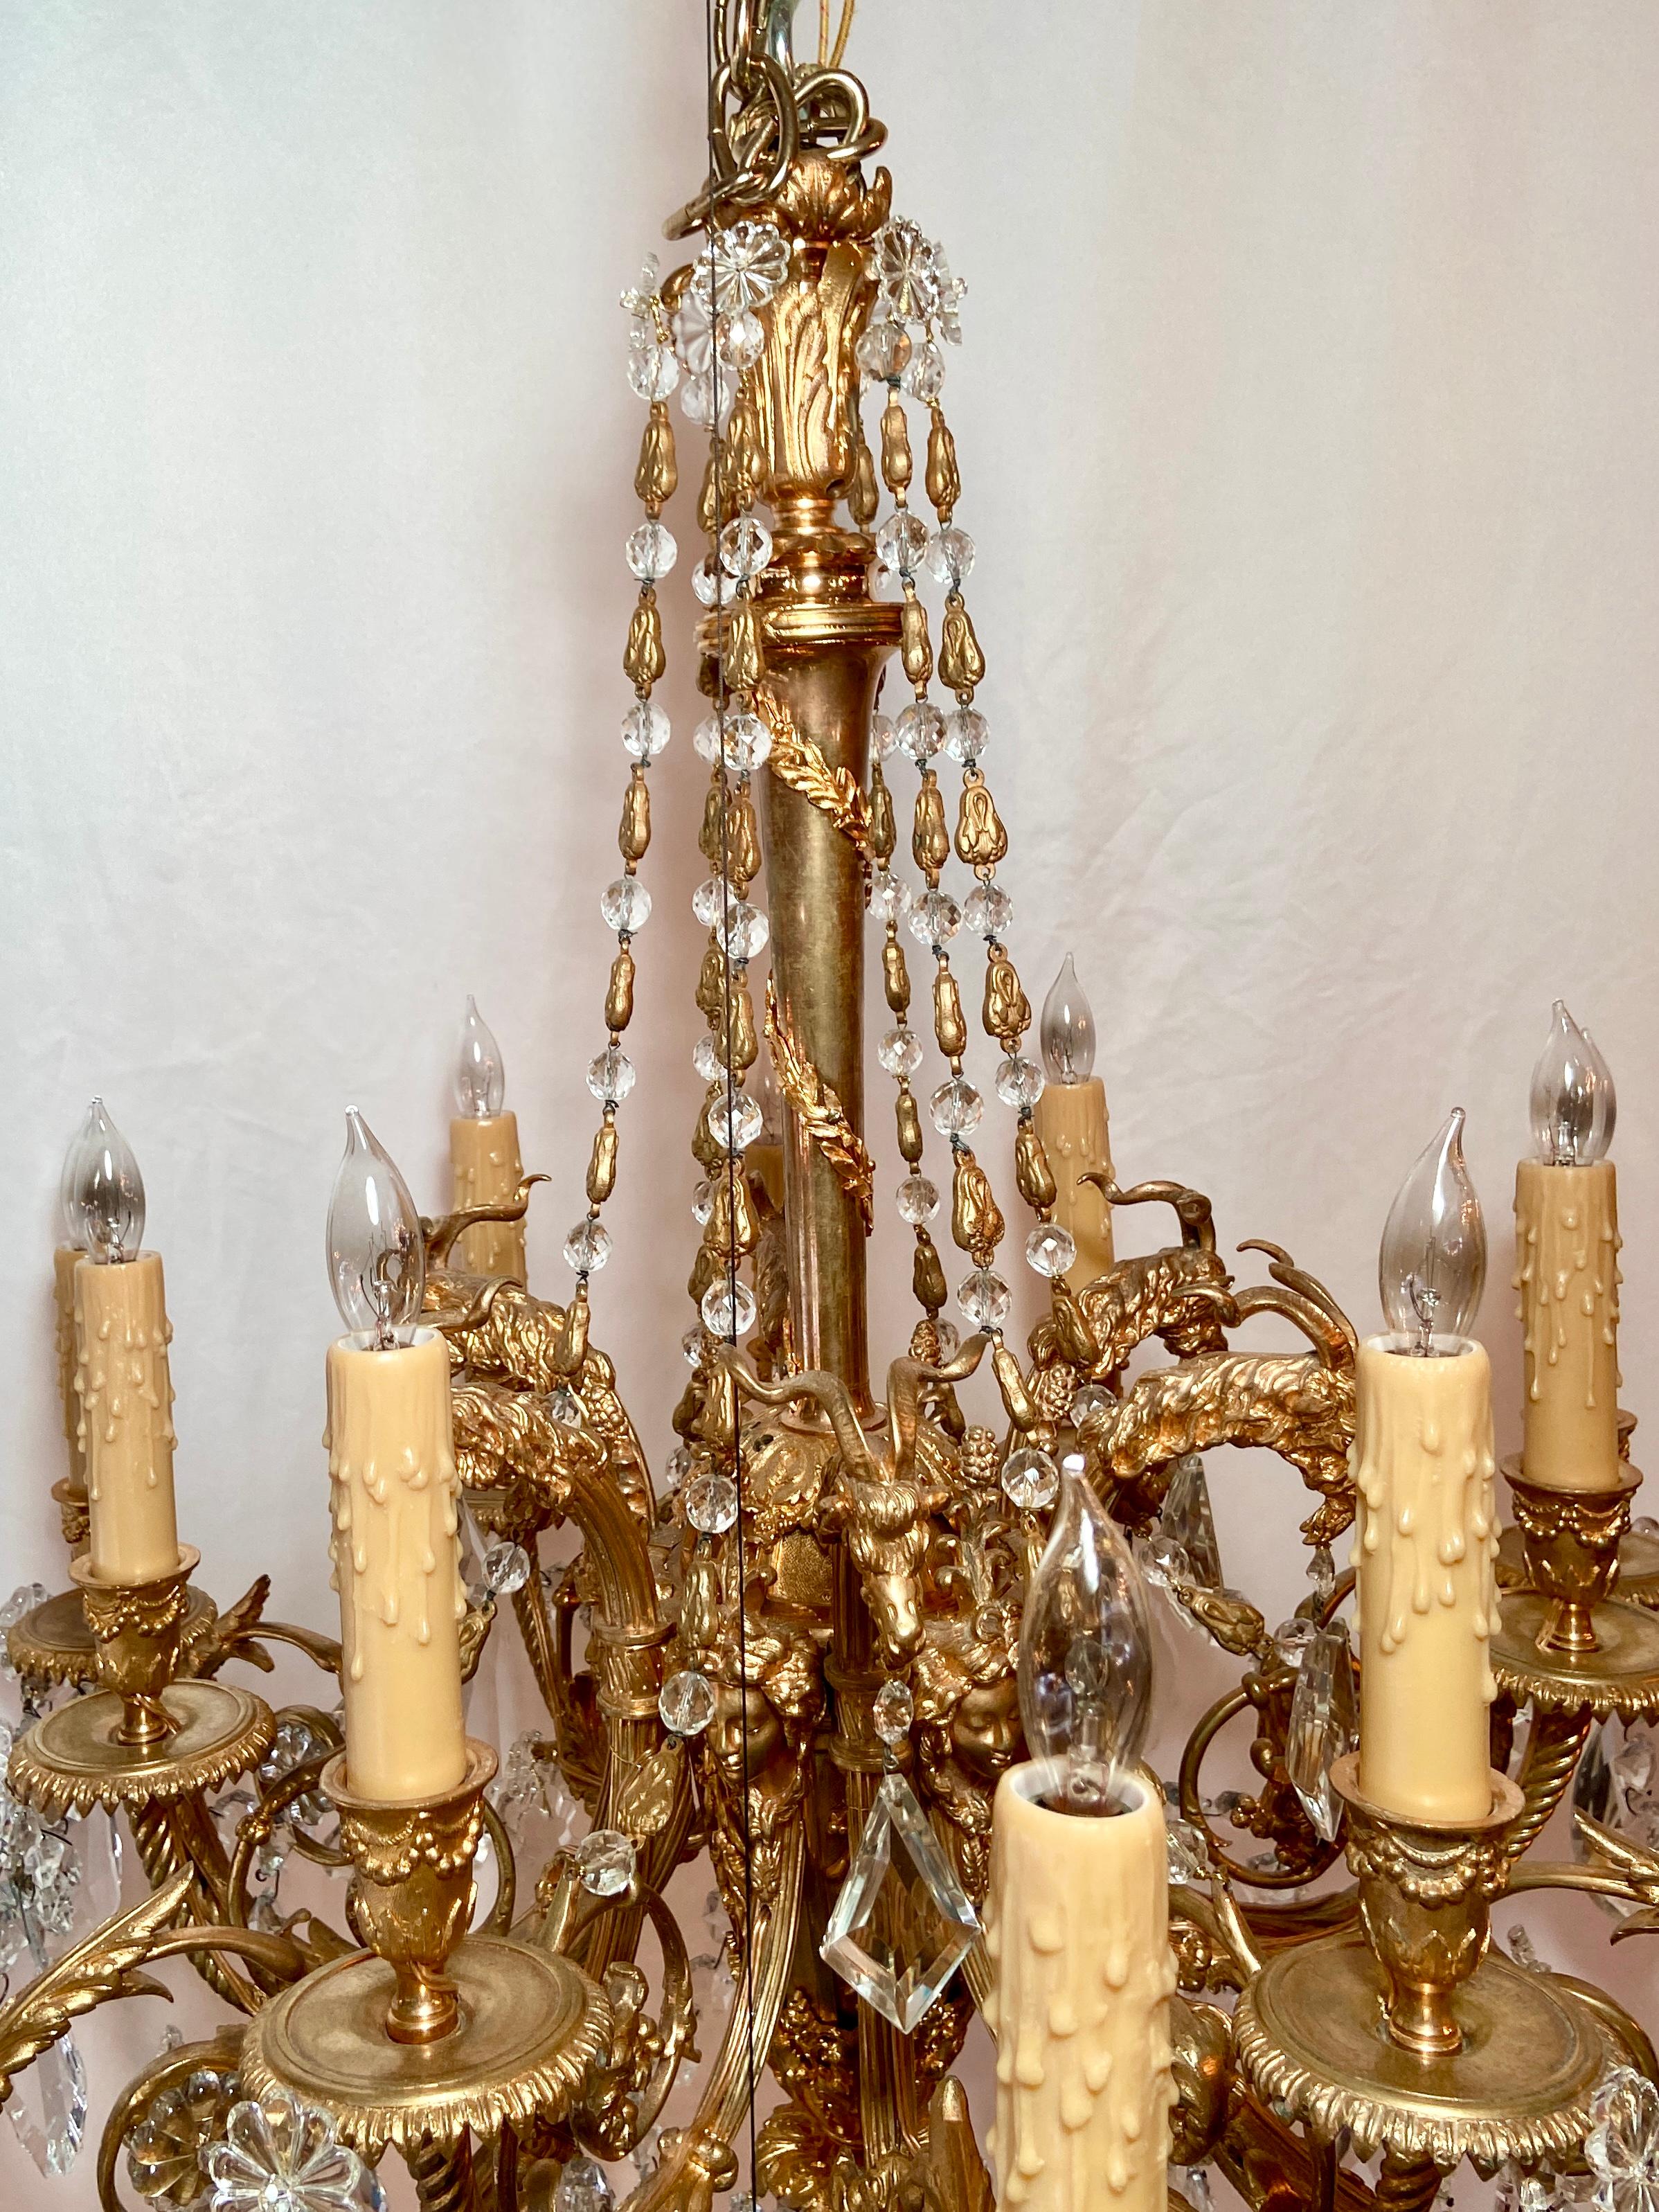 Exceptional antique French Napoleon III gold bronze and baccarat crystal chandelier, Circa 1880.